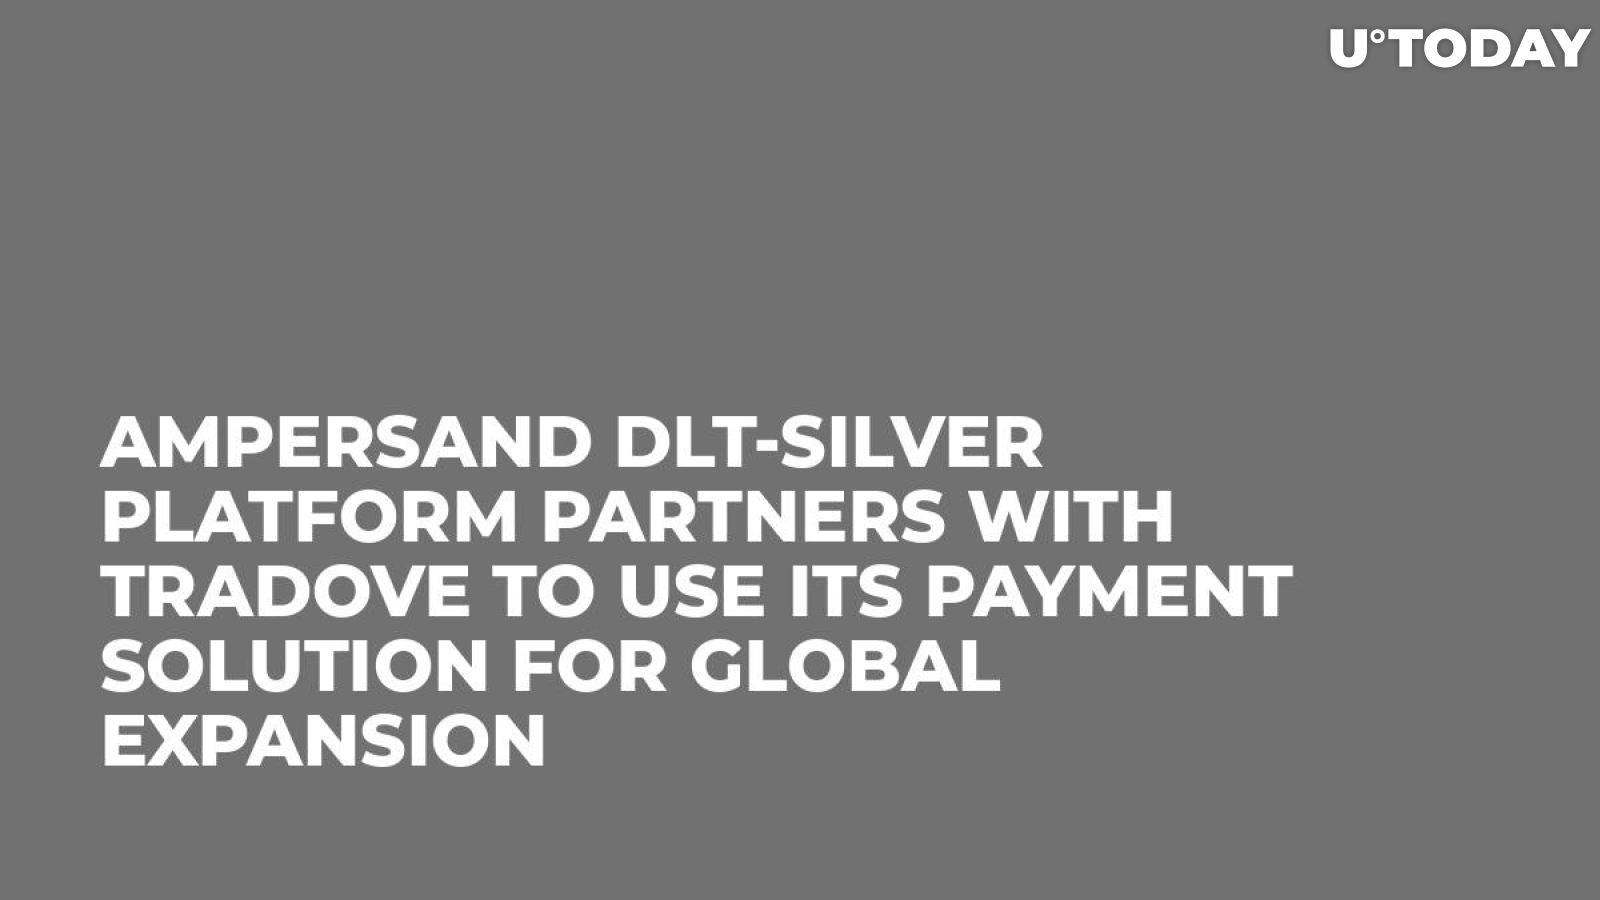 Ampersand DLT-Silver Platform Partners with TraDove to Use Its Payment Solution for Global Expansion